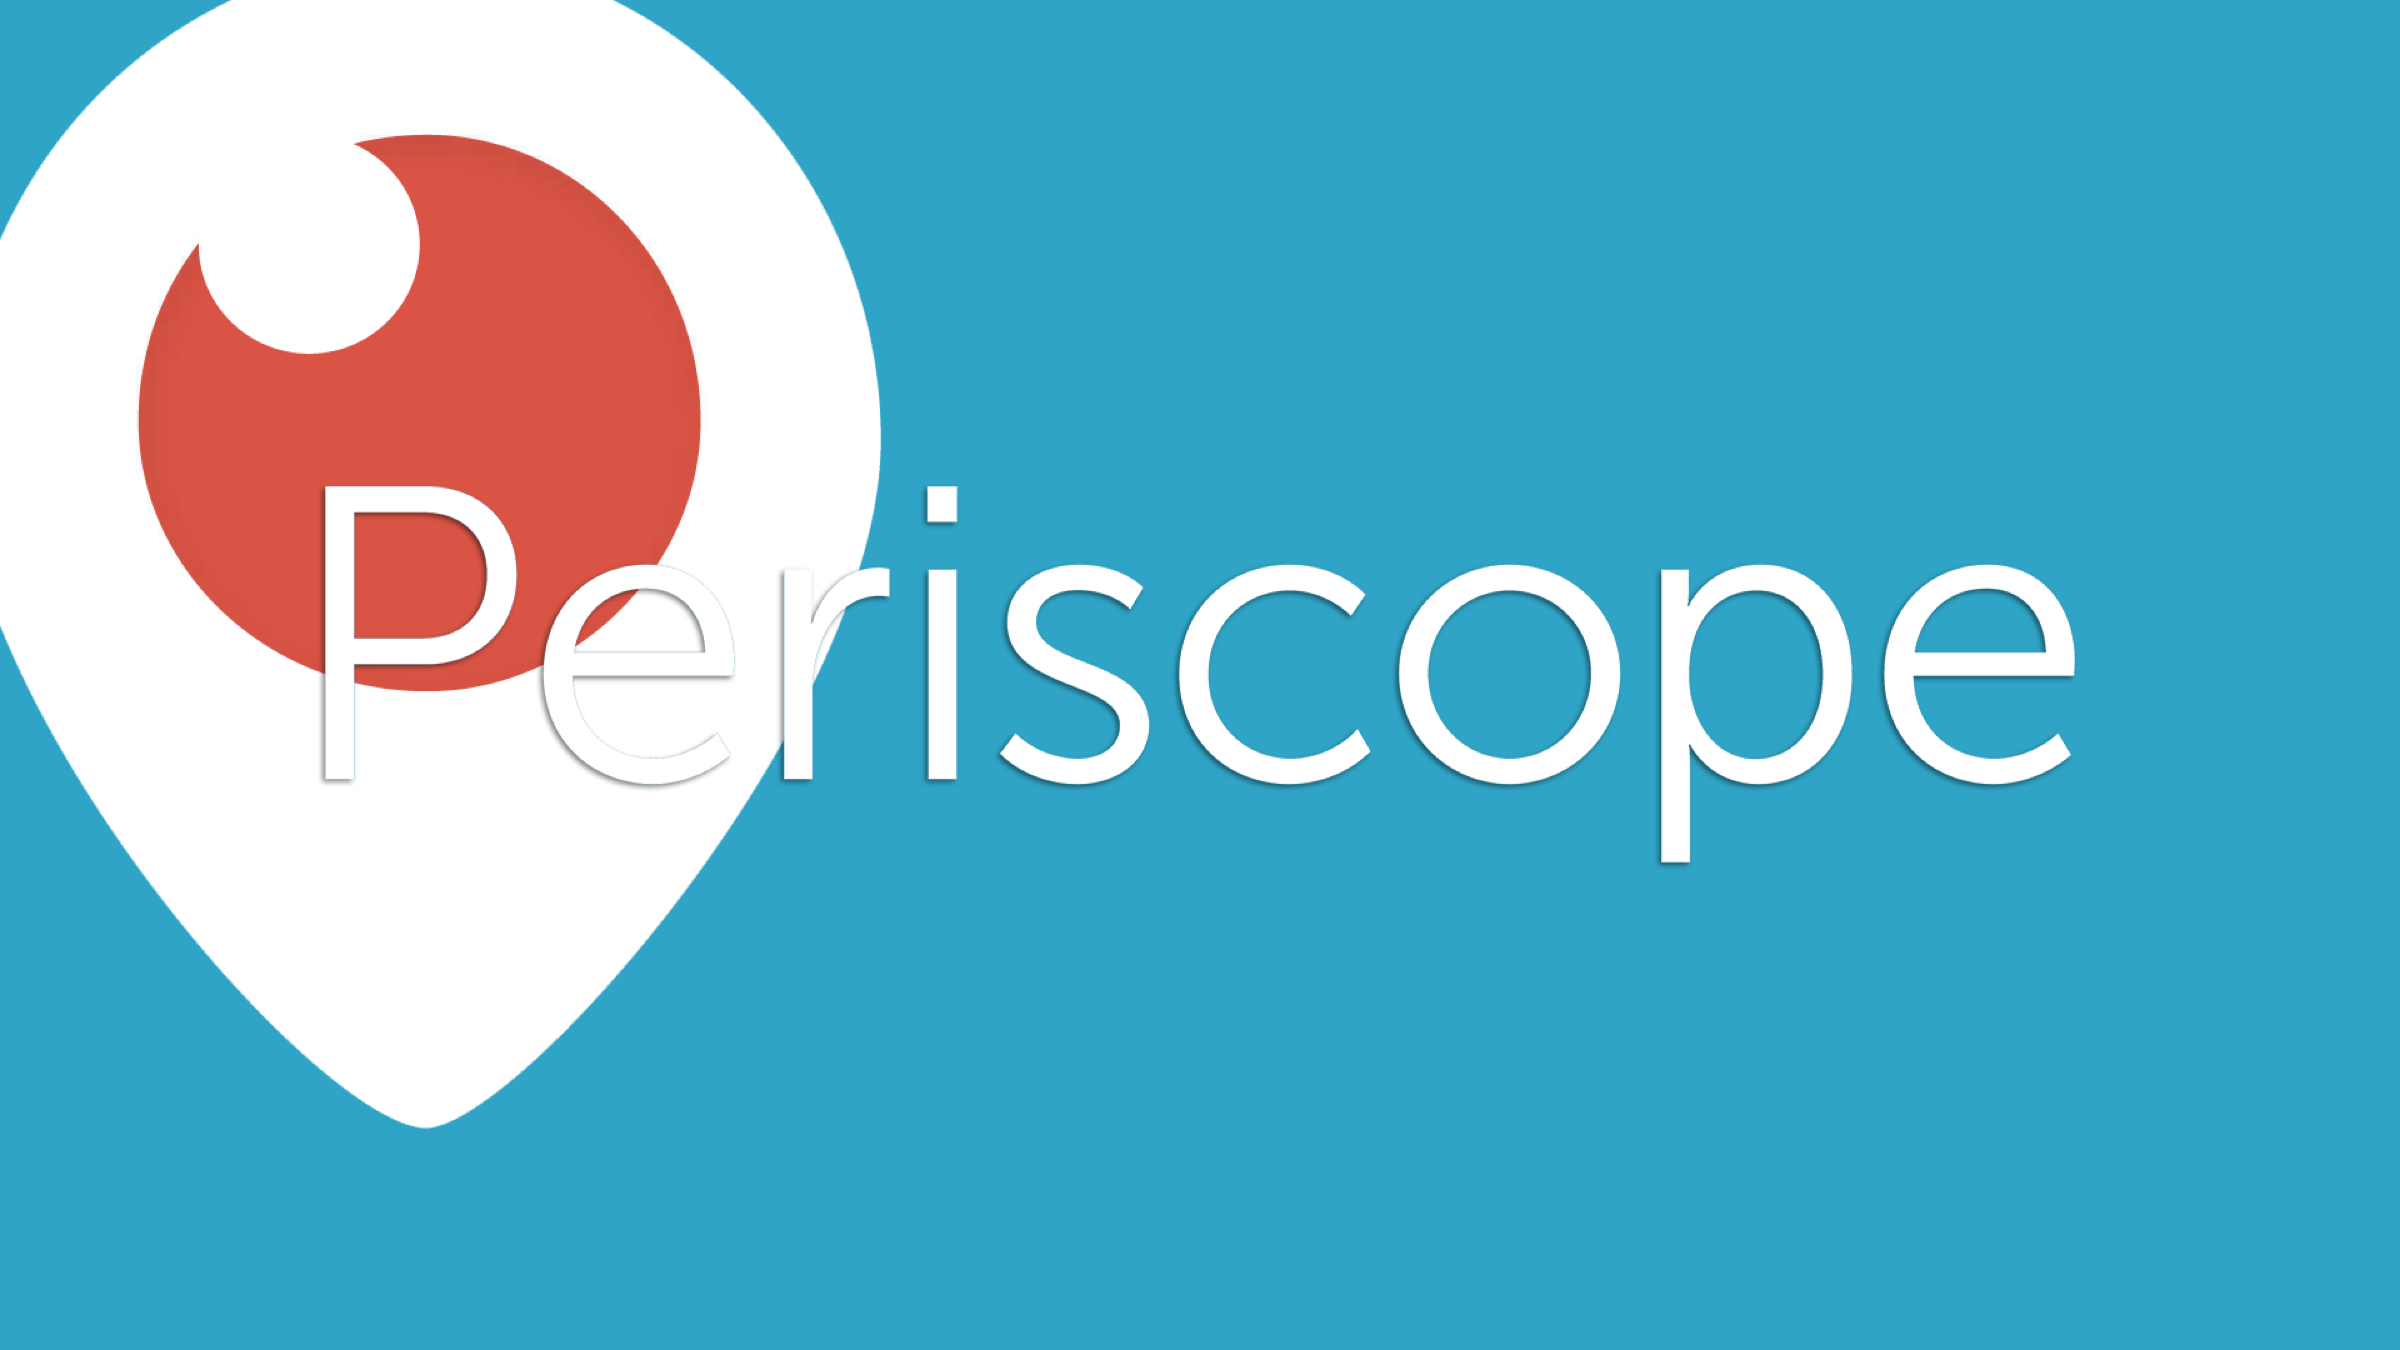 Now you can turn your phone sideways, or not, with Periscope